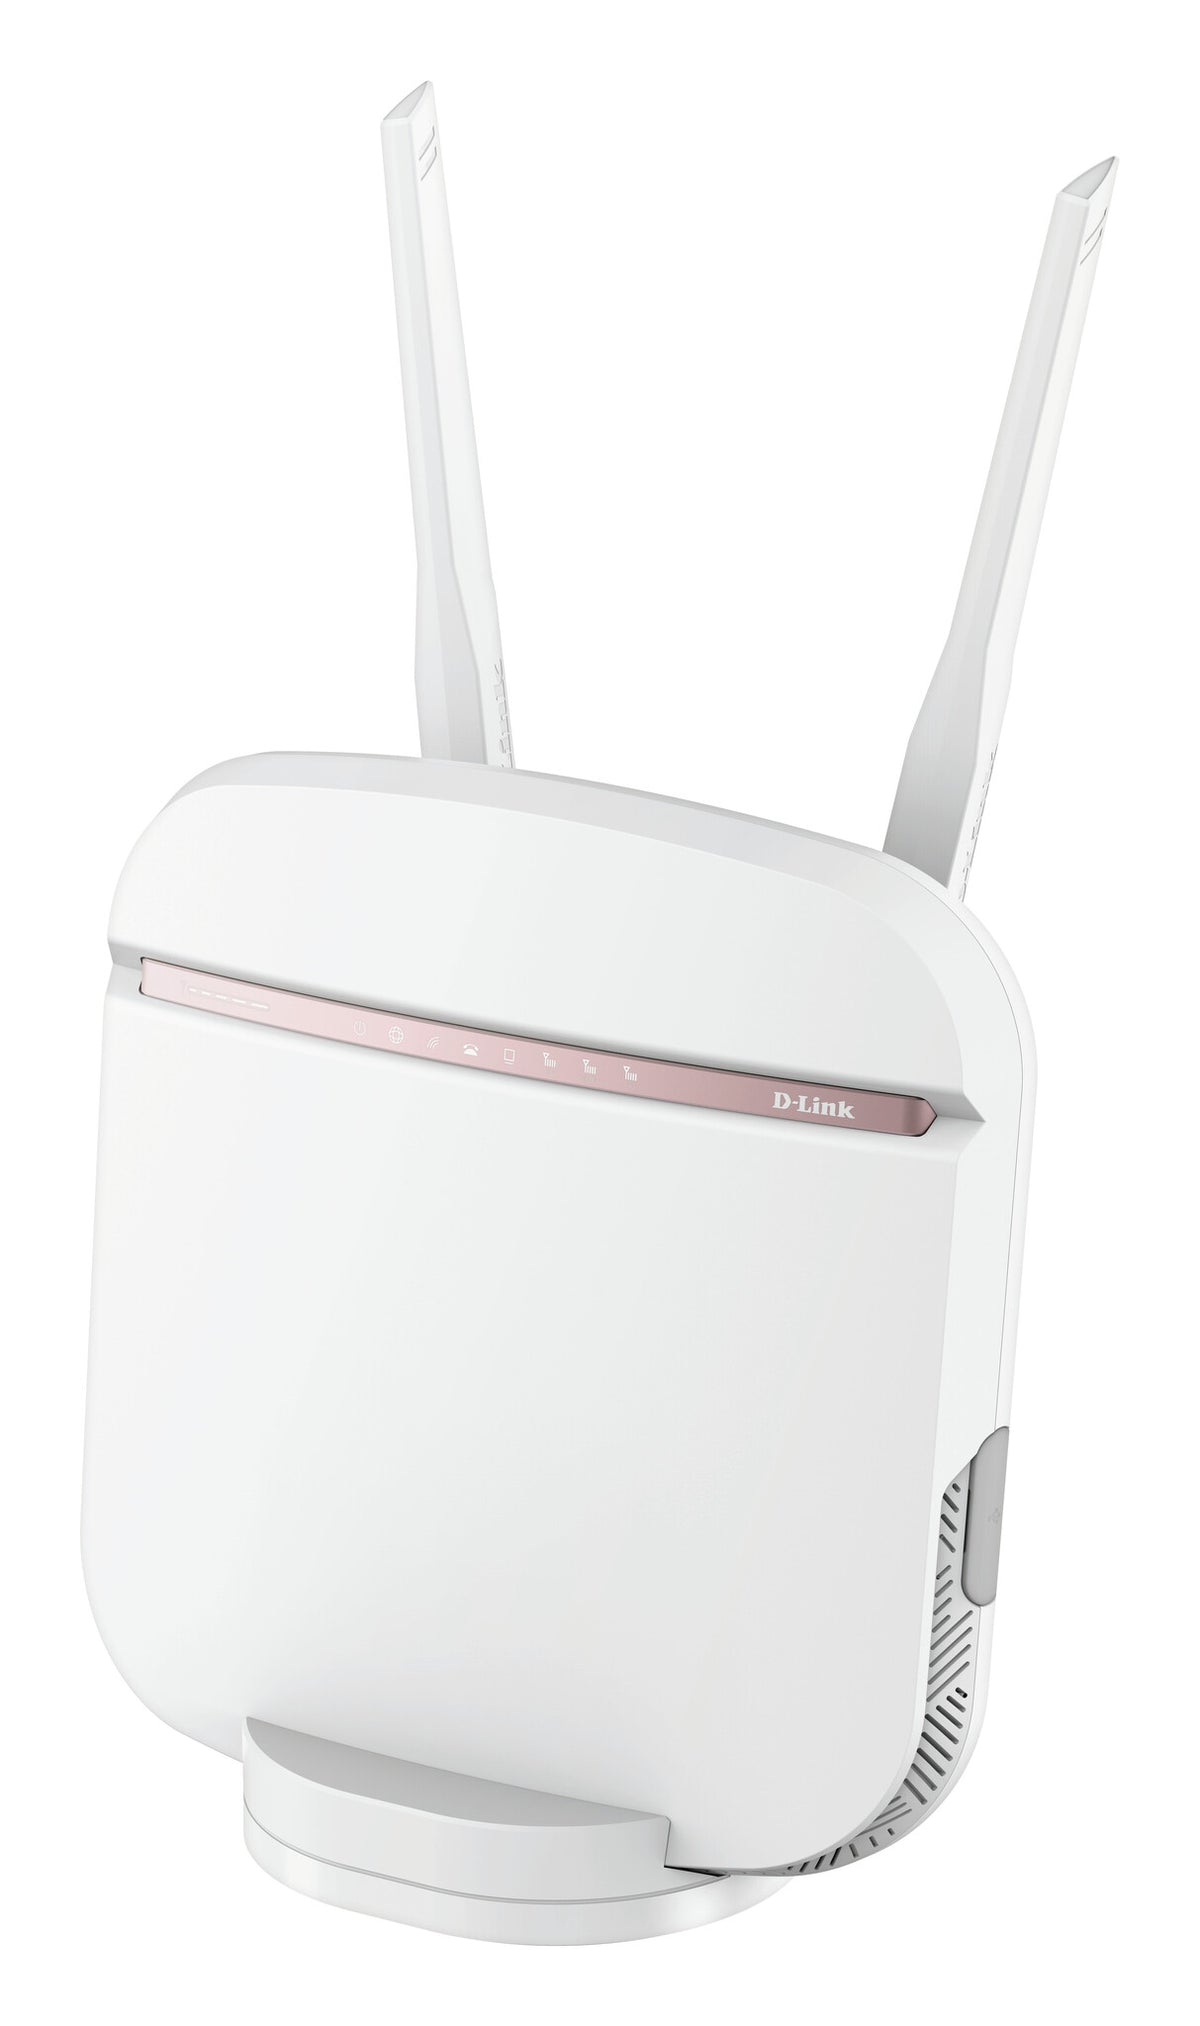 D-Link 5G AC2600 - Dual-band (2.4 GHz / 5 GHz) wireless router in White